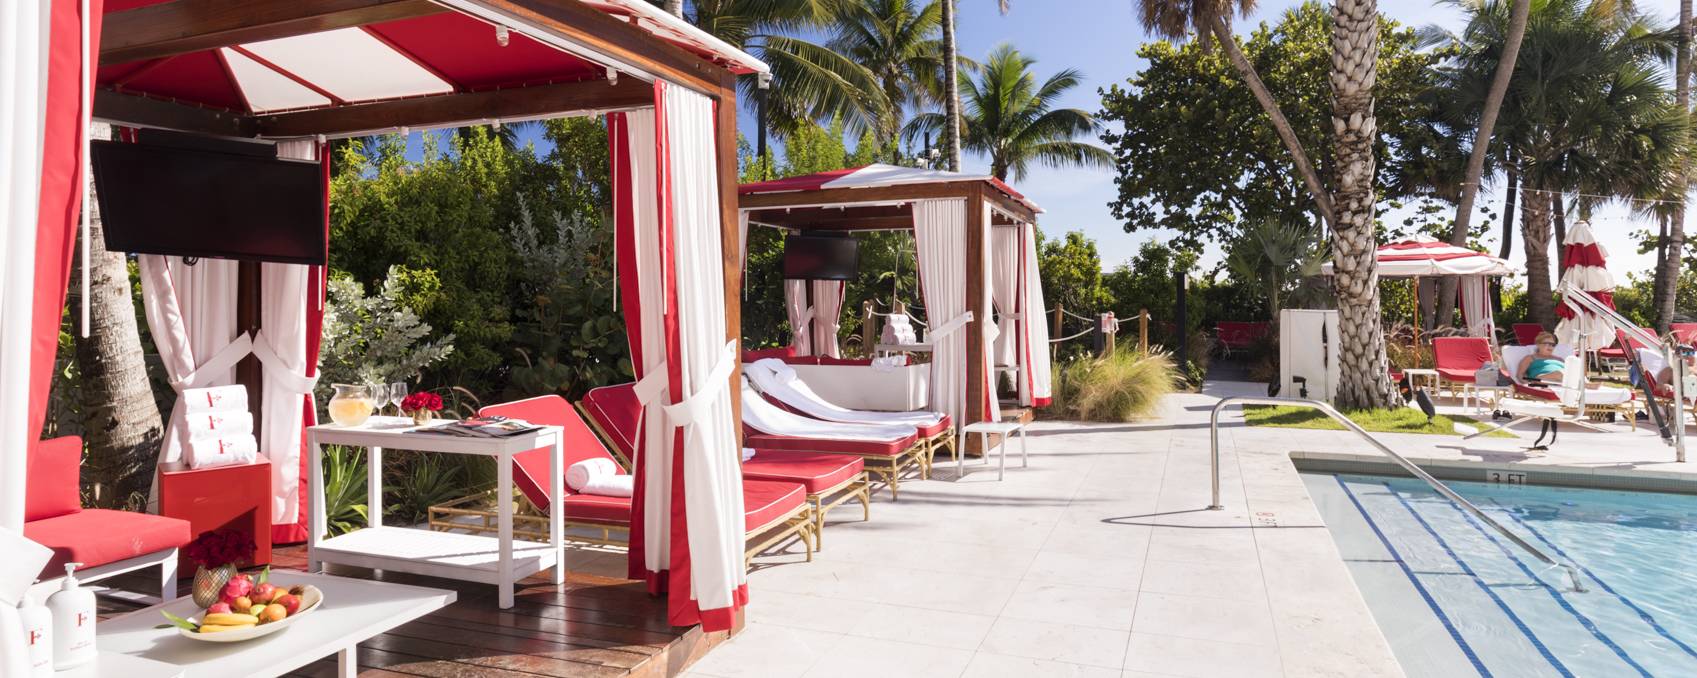 red and white tents sit poolside with openings show white and red seating underneath